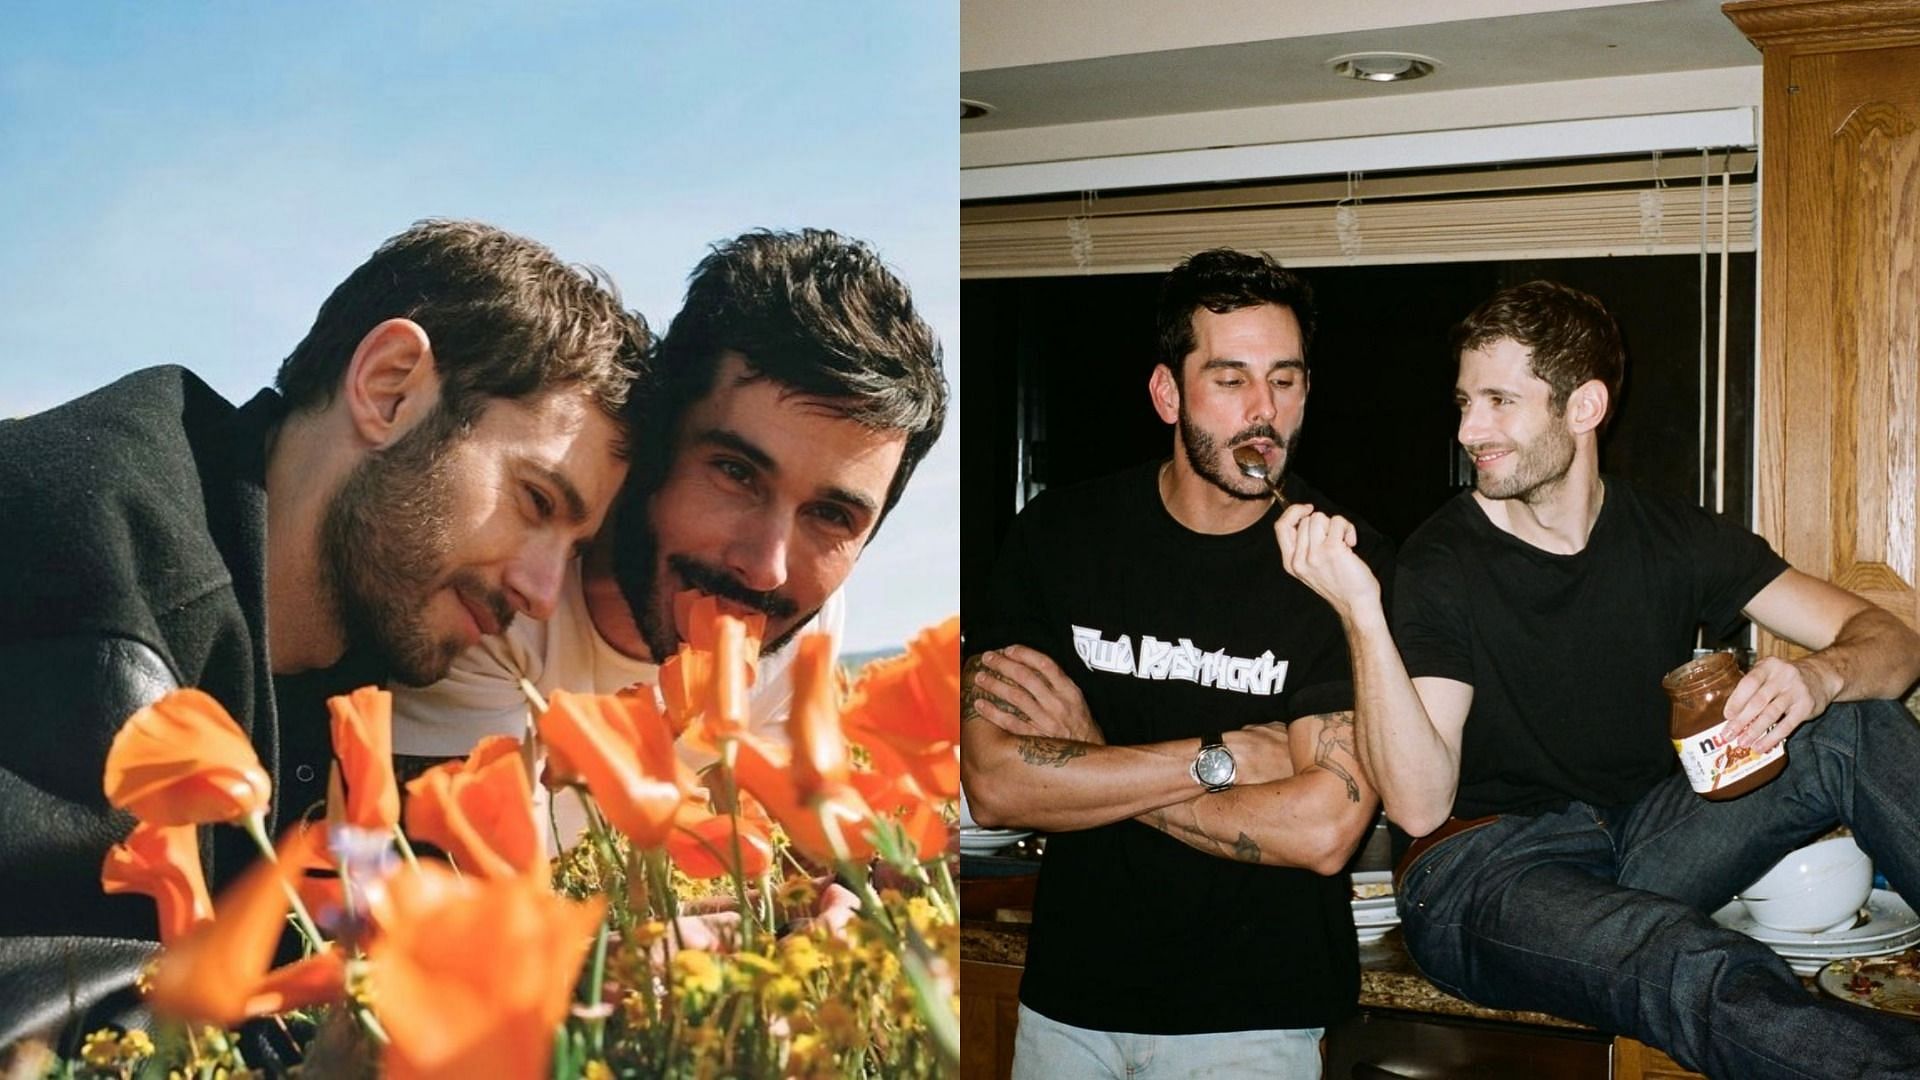 Julian Morris celebrated his 18th anniversary with longtime boyfriend, Land...